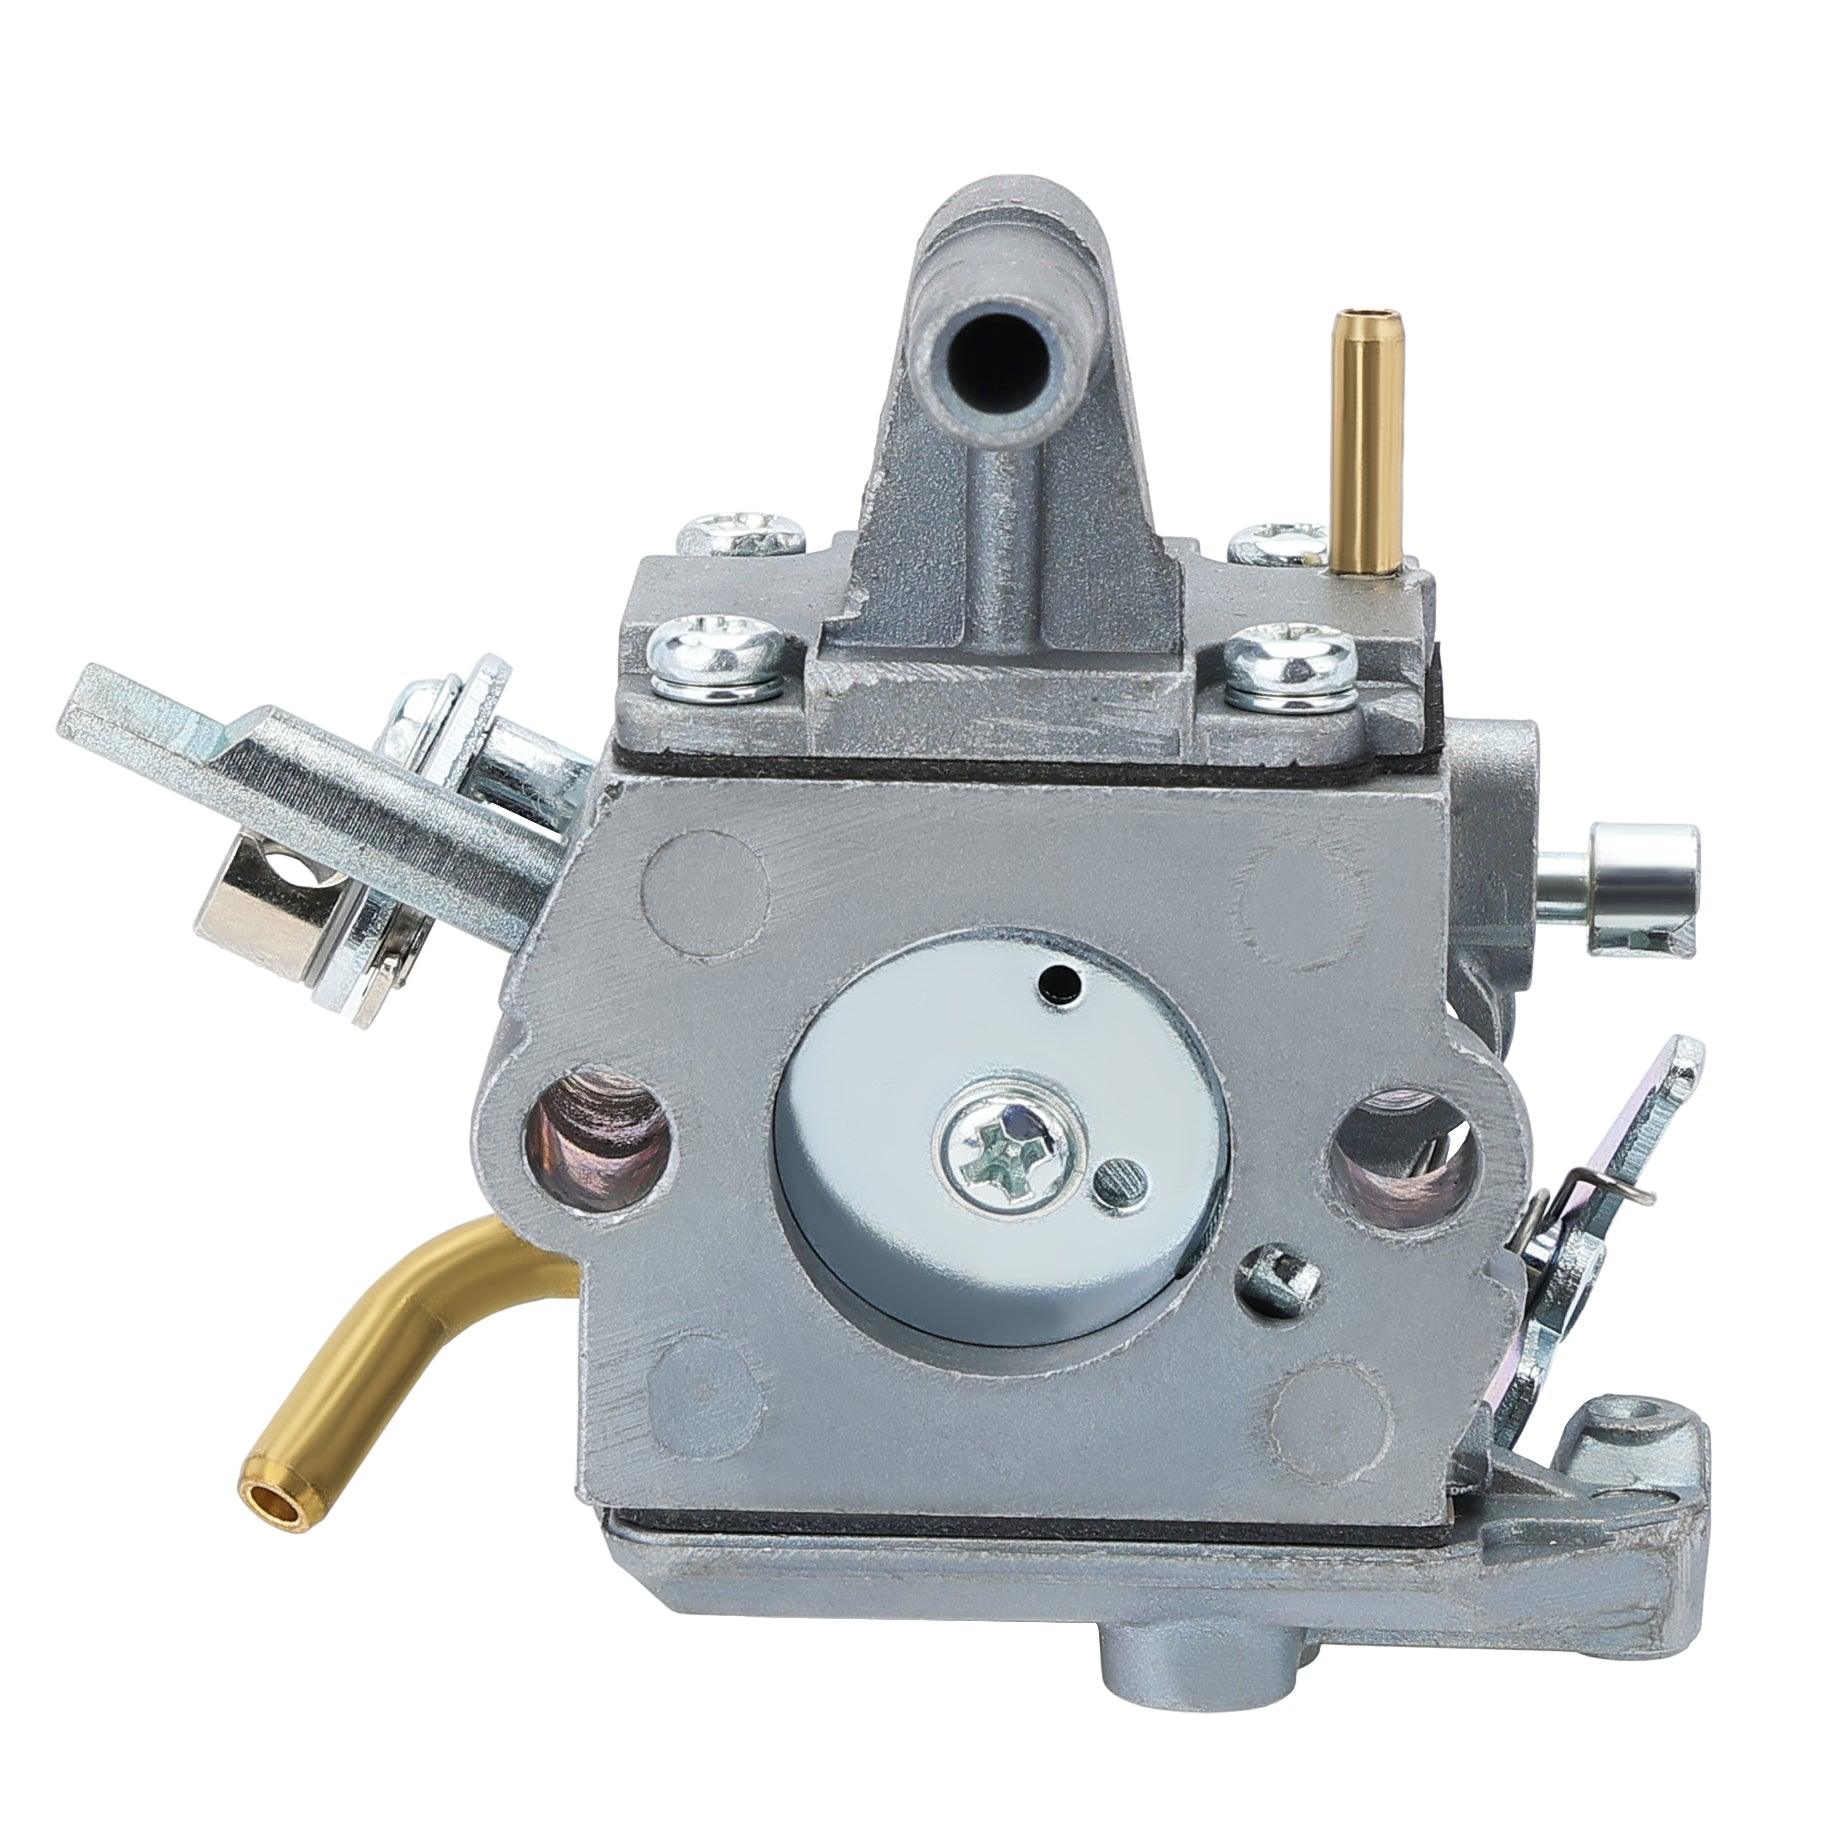 Hipa GA2662A Carburetor Compatible with Stihl FS400 FS450 FS480 Clearing Saws FR350 FR450 FR480 Backpack Brushcutter String Trimmers Similar to Zama C1Q-S34H 4128 120 0651 - hipaparts